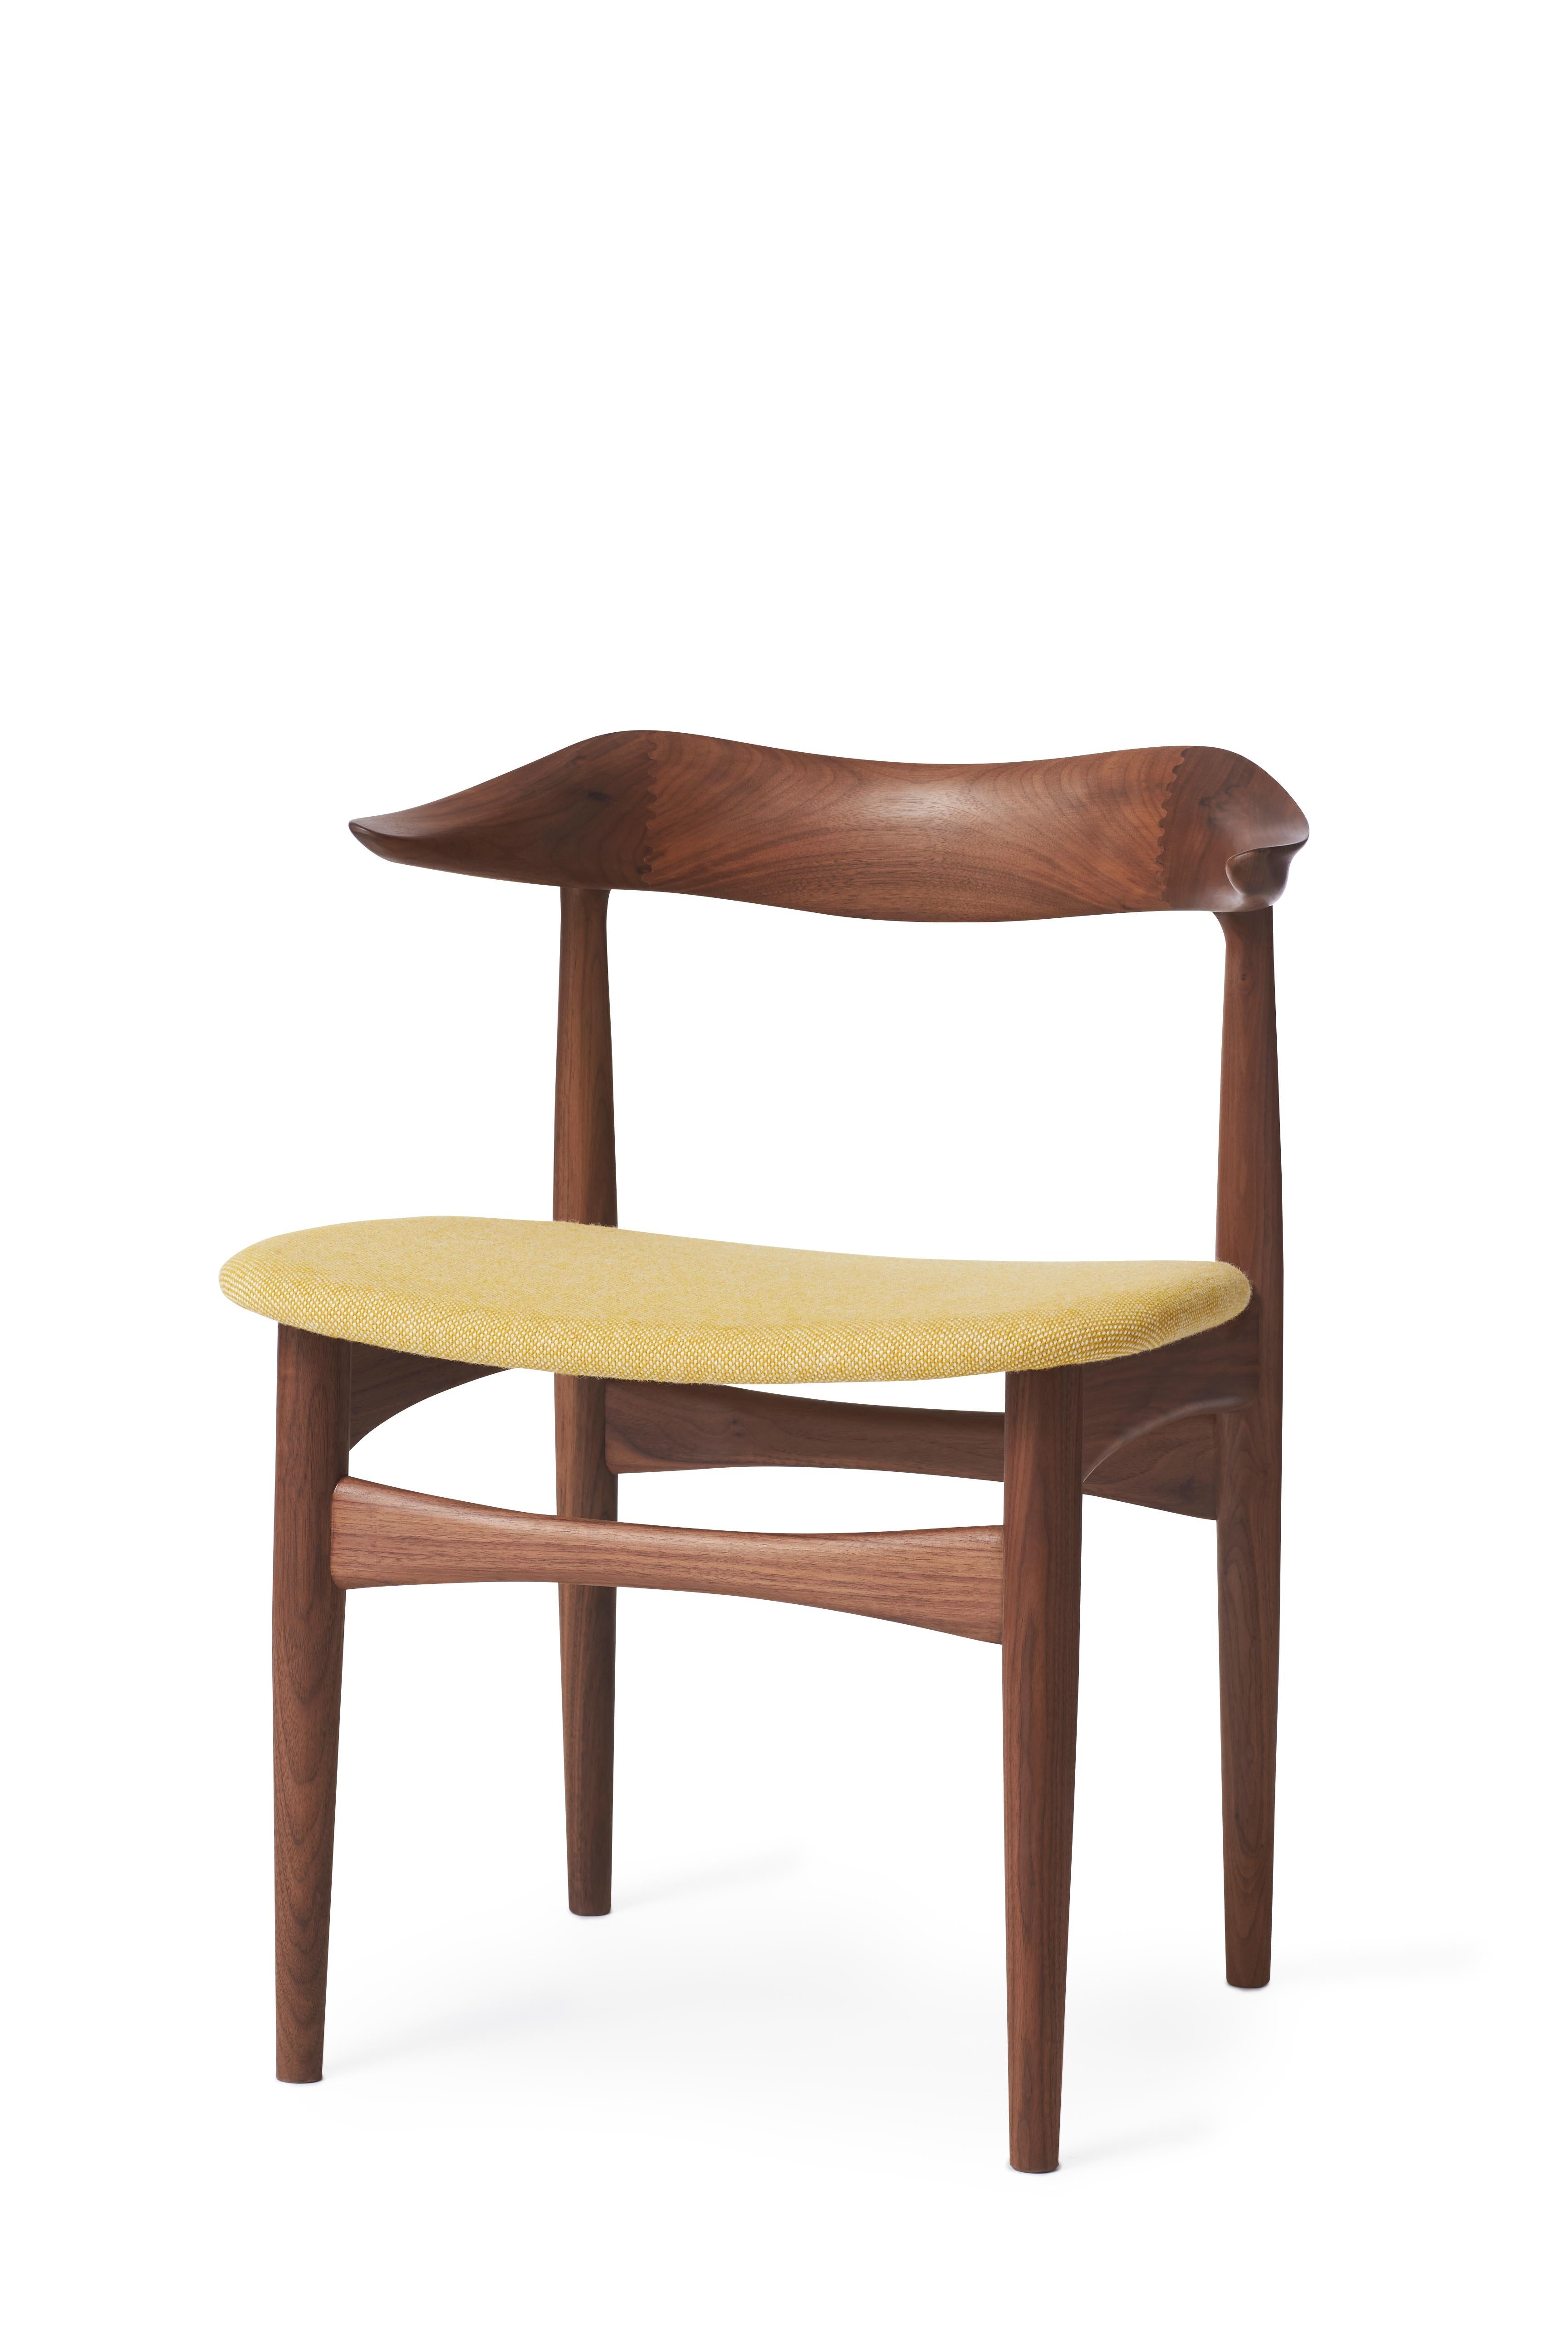 For Sale: Yellow (Halling 407) Cow Horn Walnut Chair, by Knud Færch from Warm Nordic 2